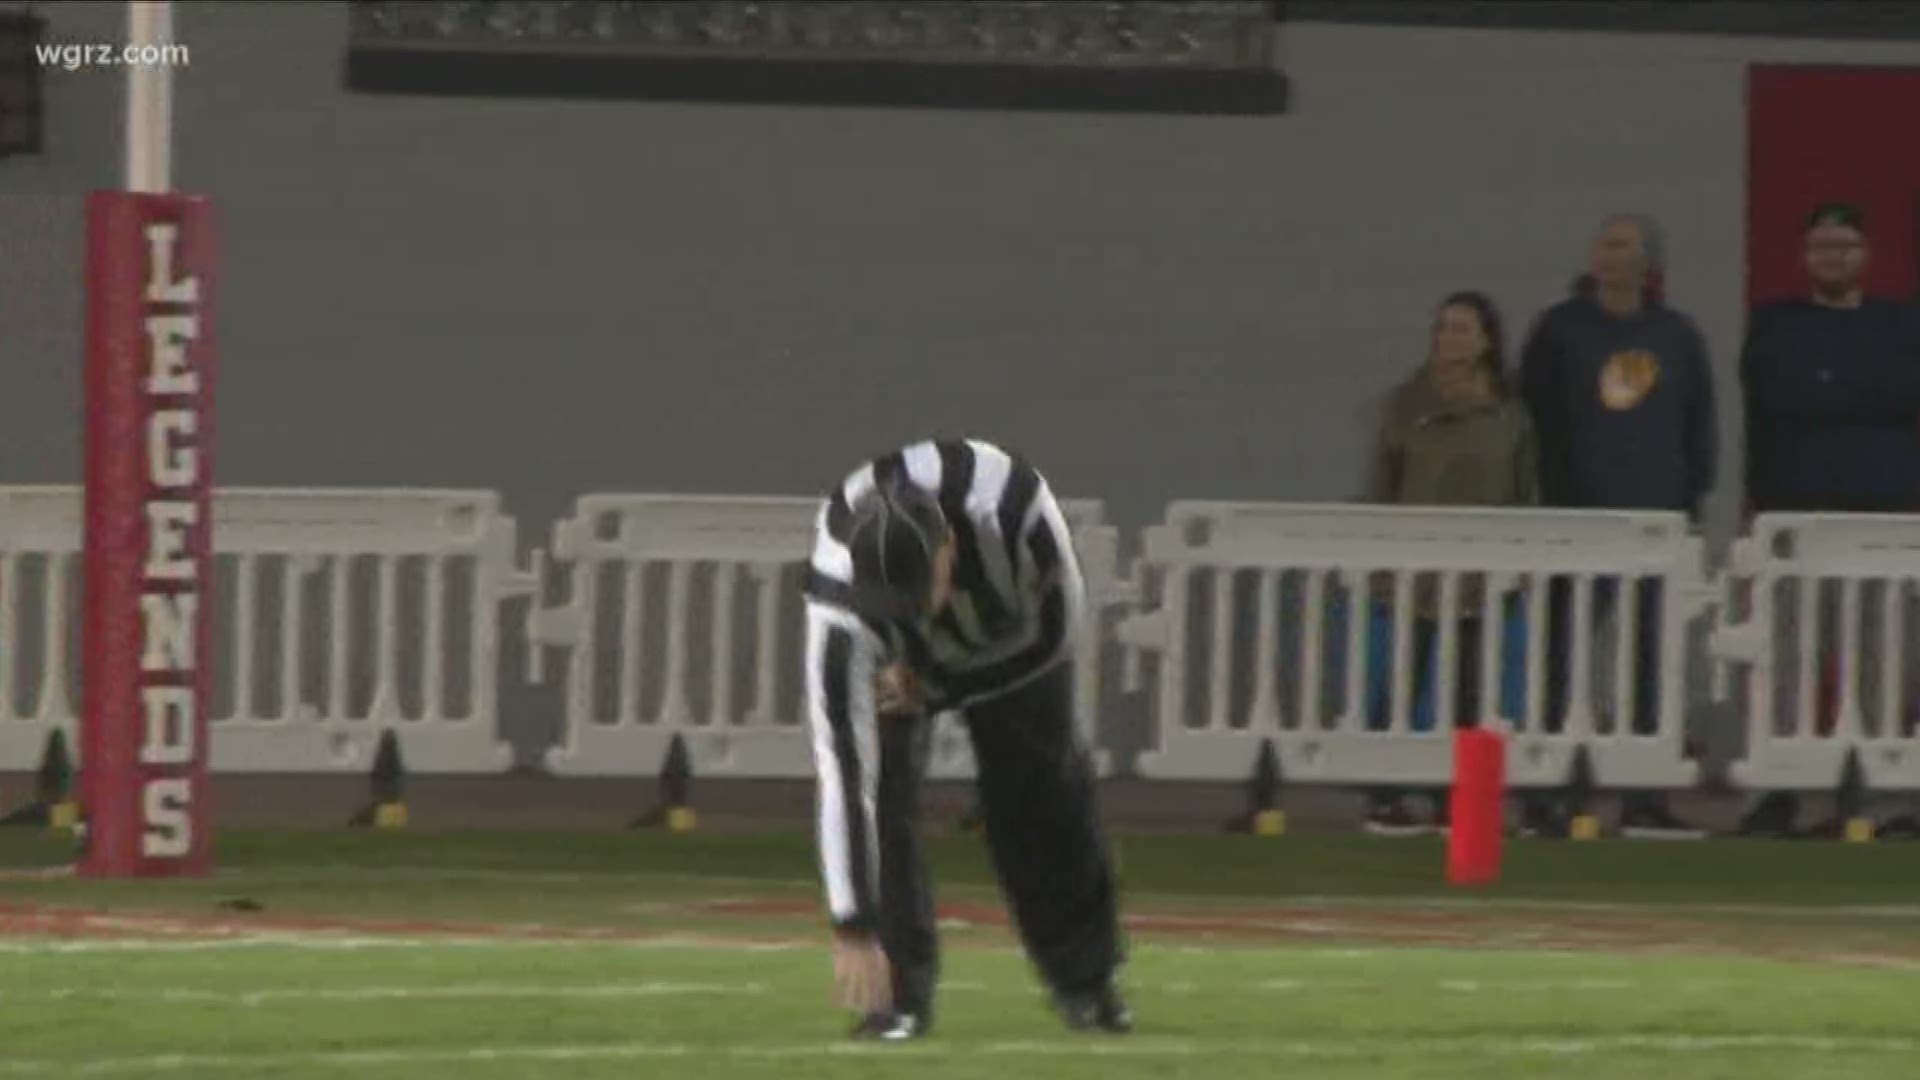 Local youth sports teams are struggling nowadays. There is a shortage of game officials all across anew York.